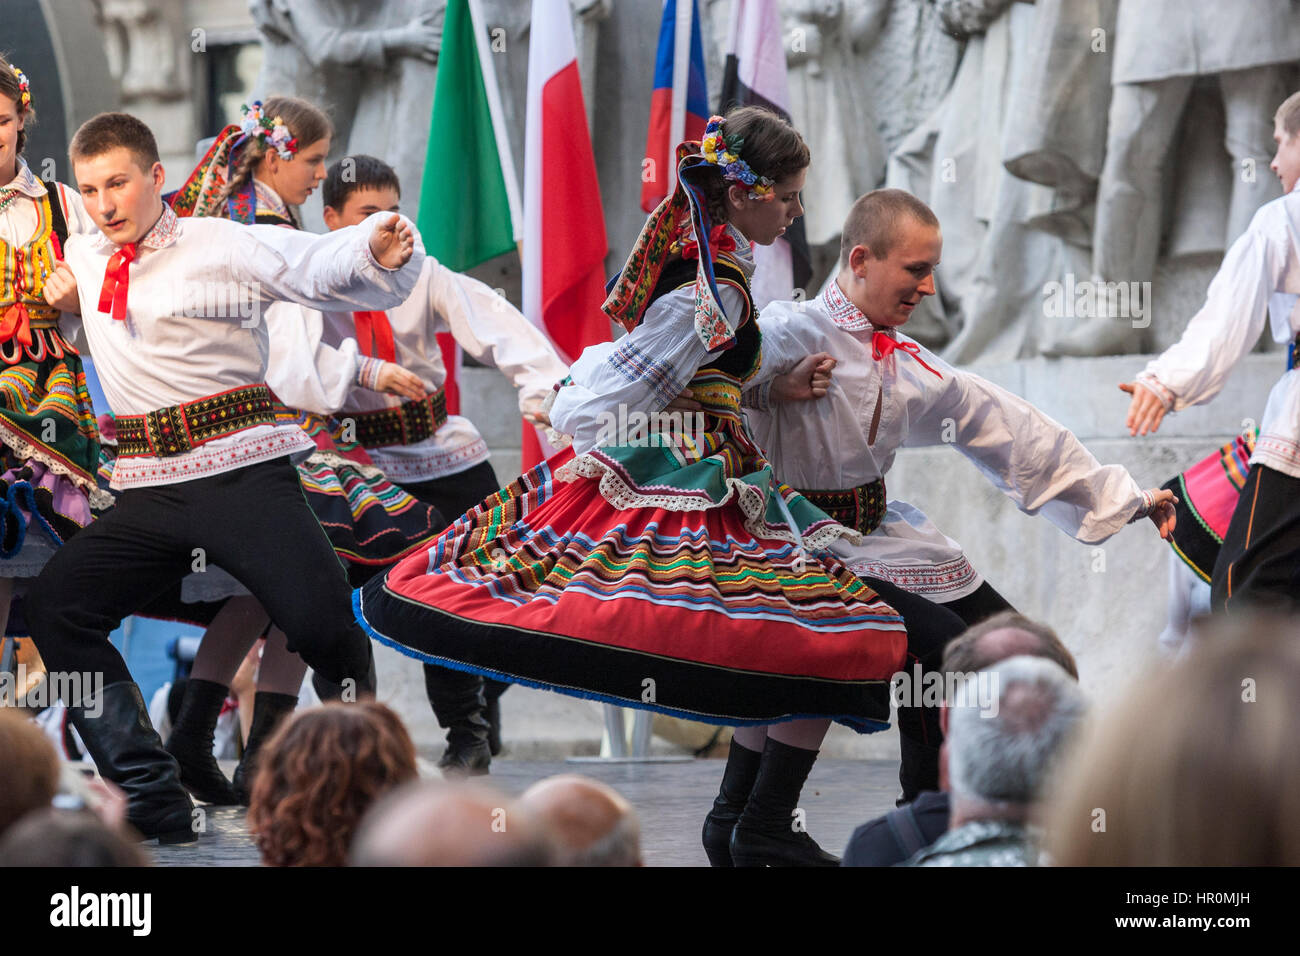 Boys and girls in folk costume performing a Hungarian folk dance in Budapest, Hungary Stock Photo